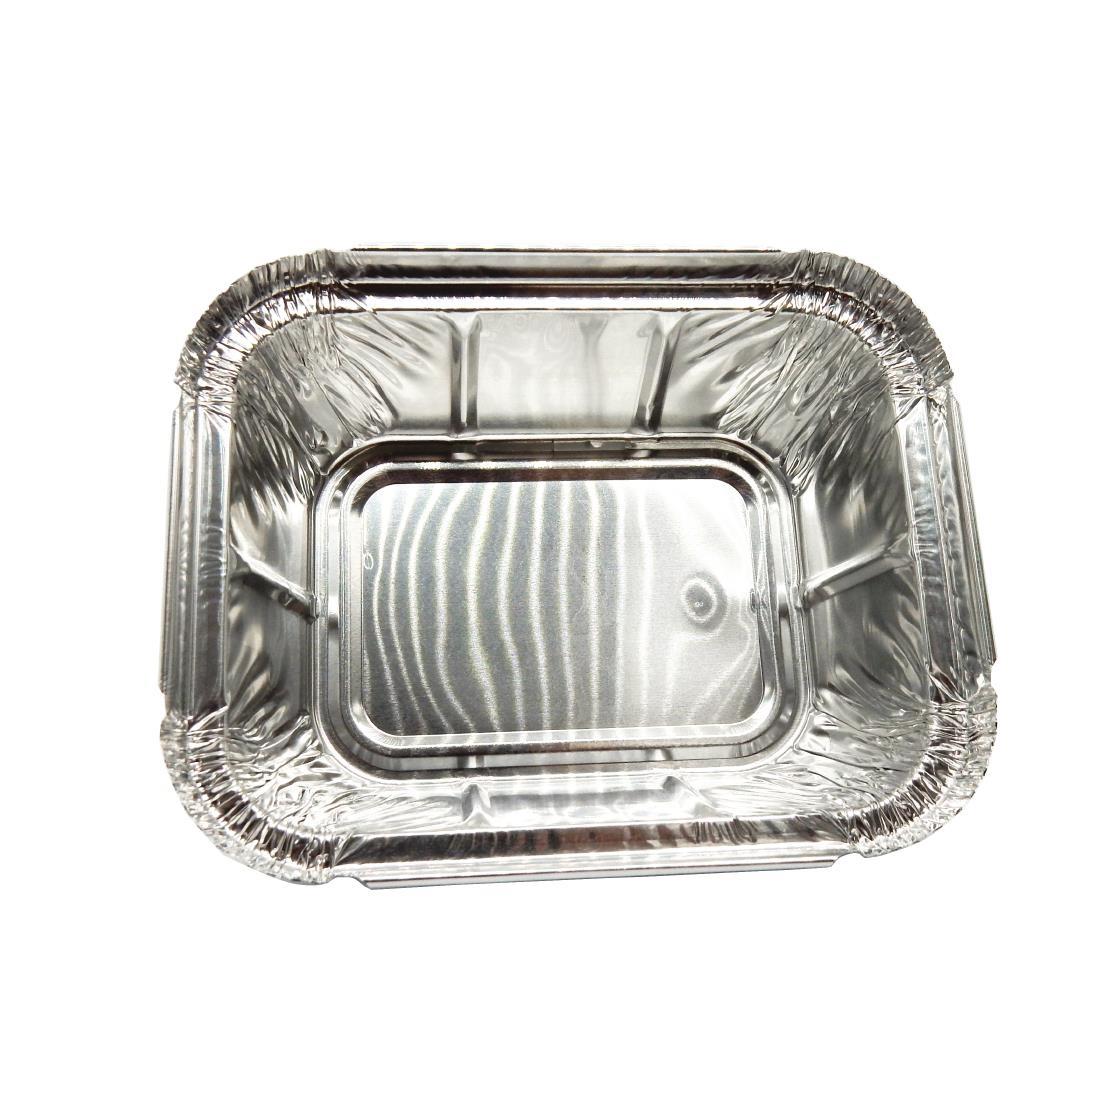 Rectangular Foil Containers 500ml / 16oz (Pack of 1000) - DY198  - 4